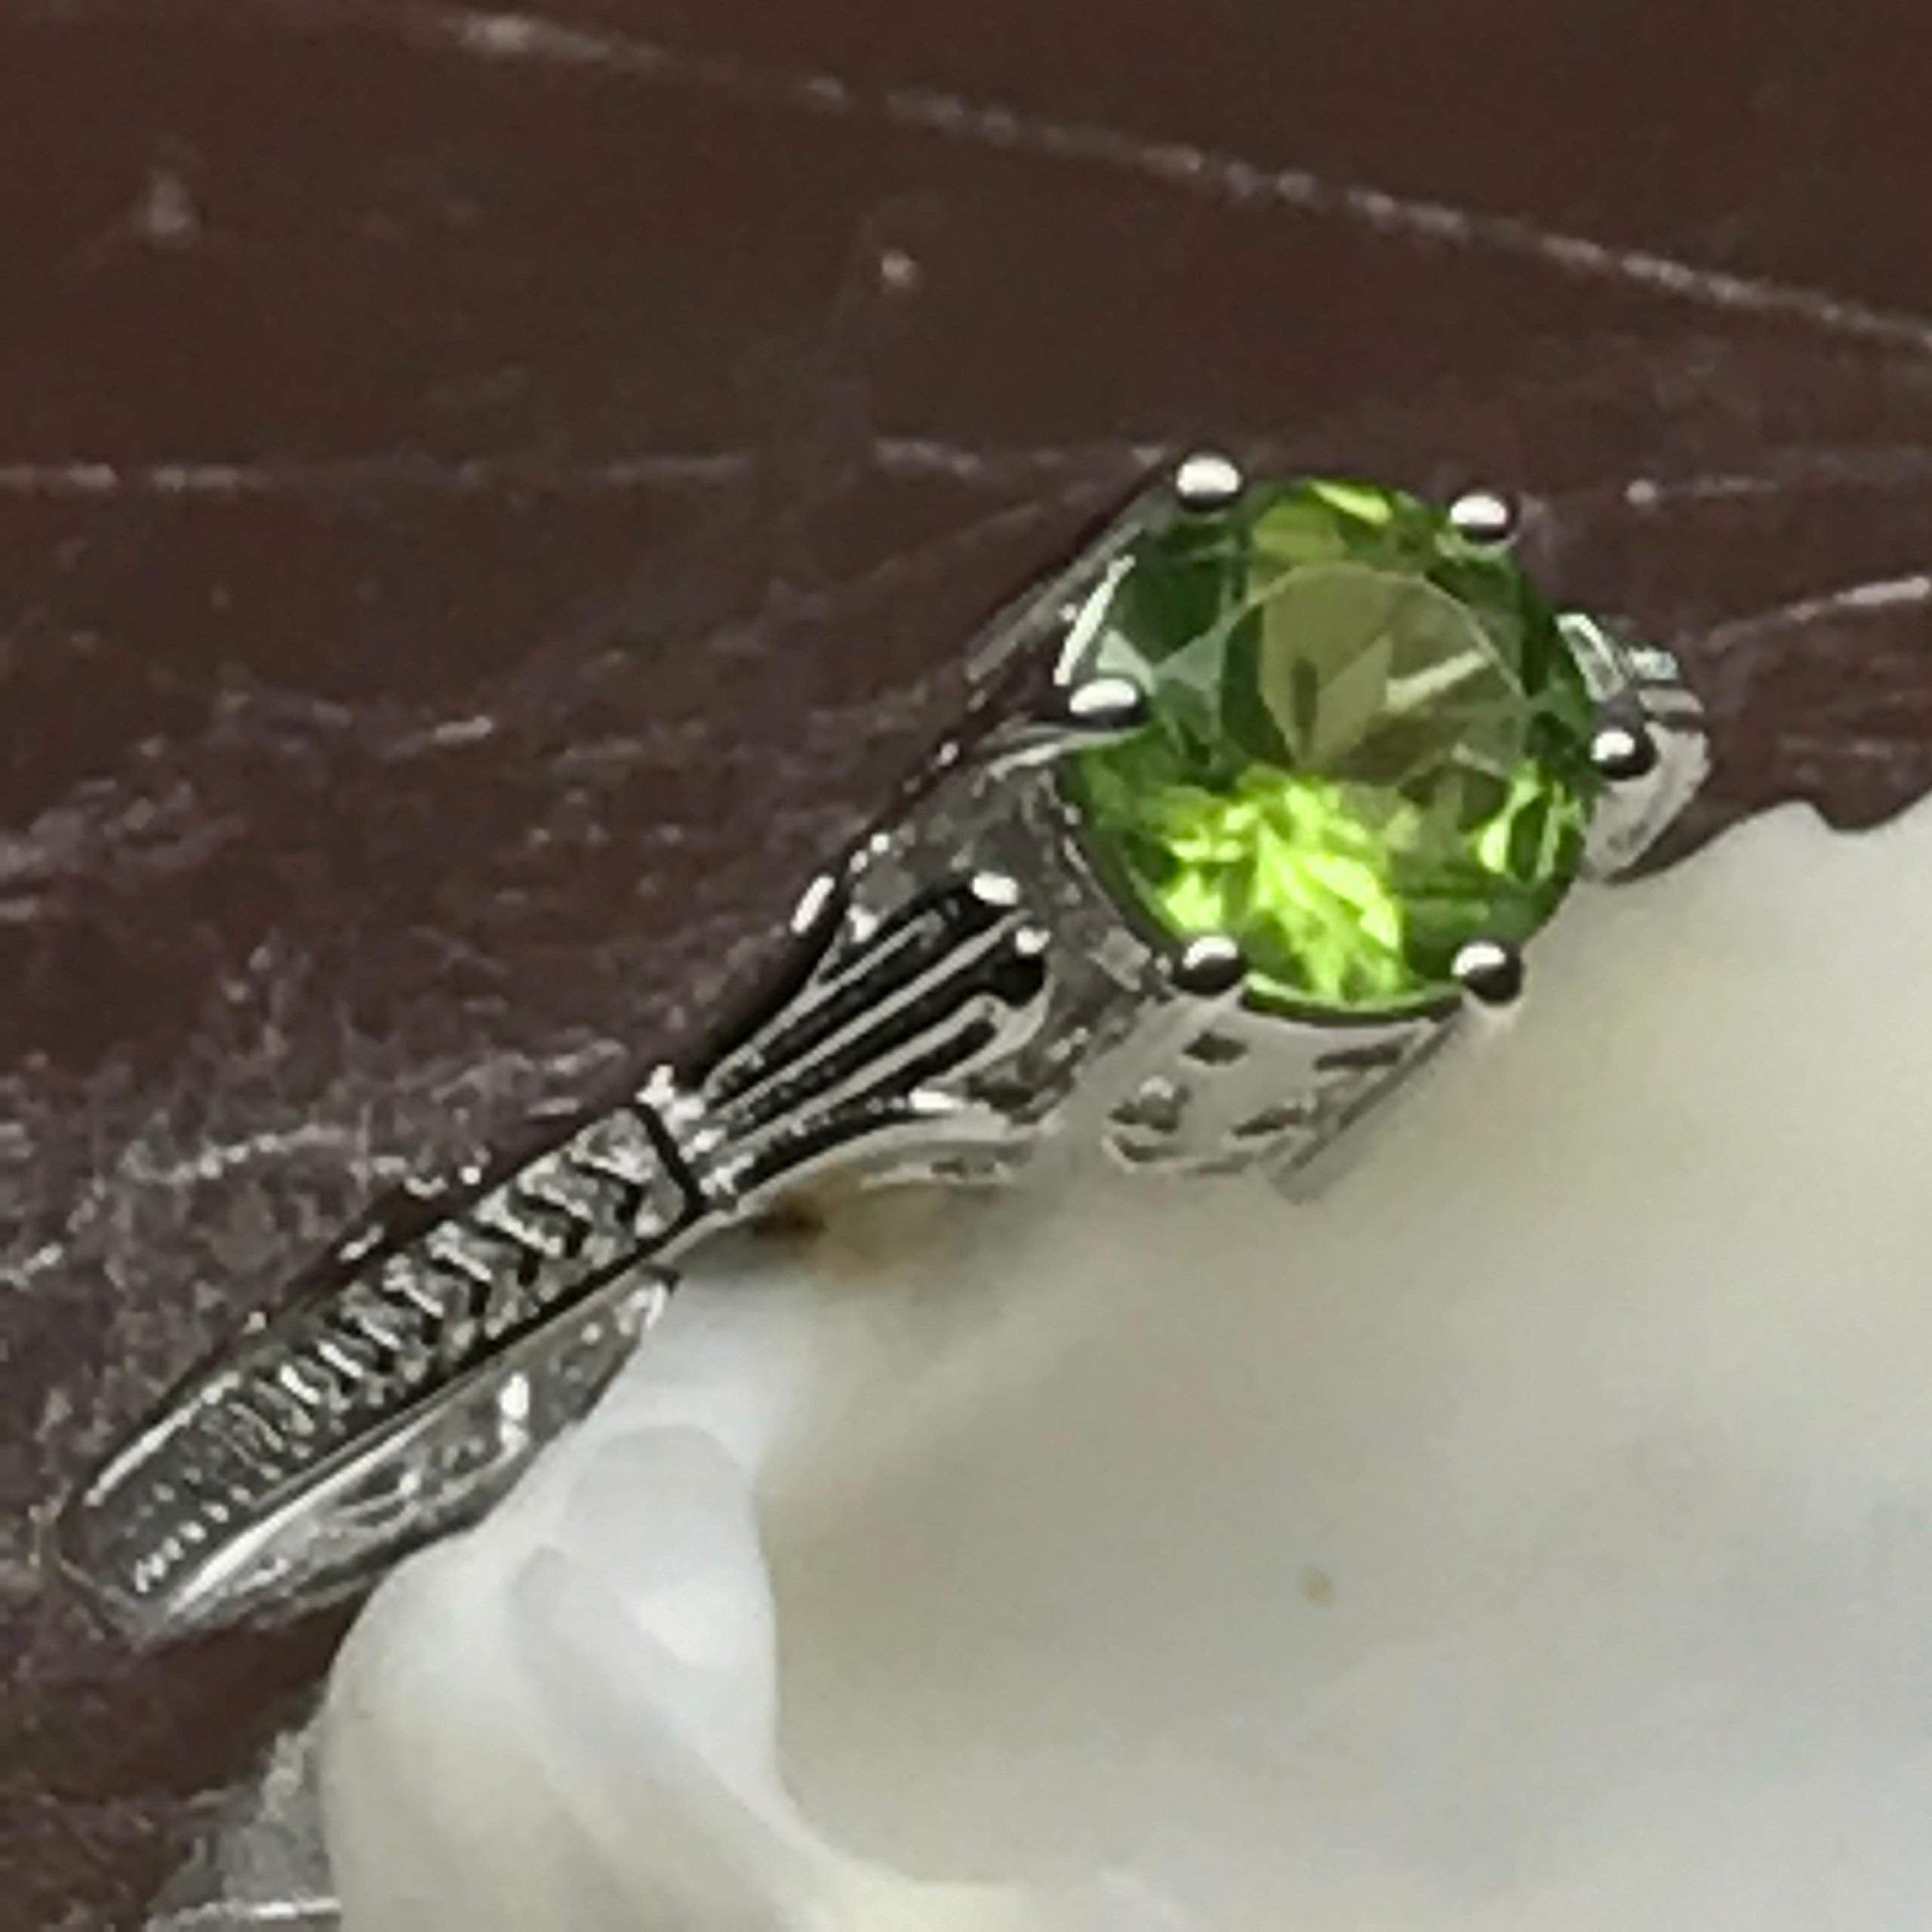 Genuine 1ct Green Peridot 925 Solid Sterling Silver Engagement Ring Size 5, 6, 7, 8, 9 - Natural Rocks by Kala